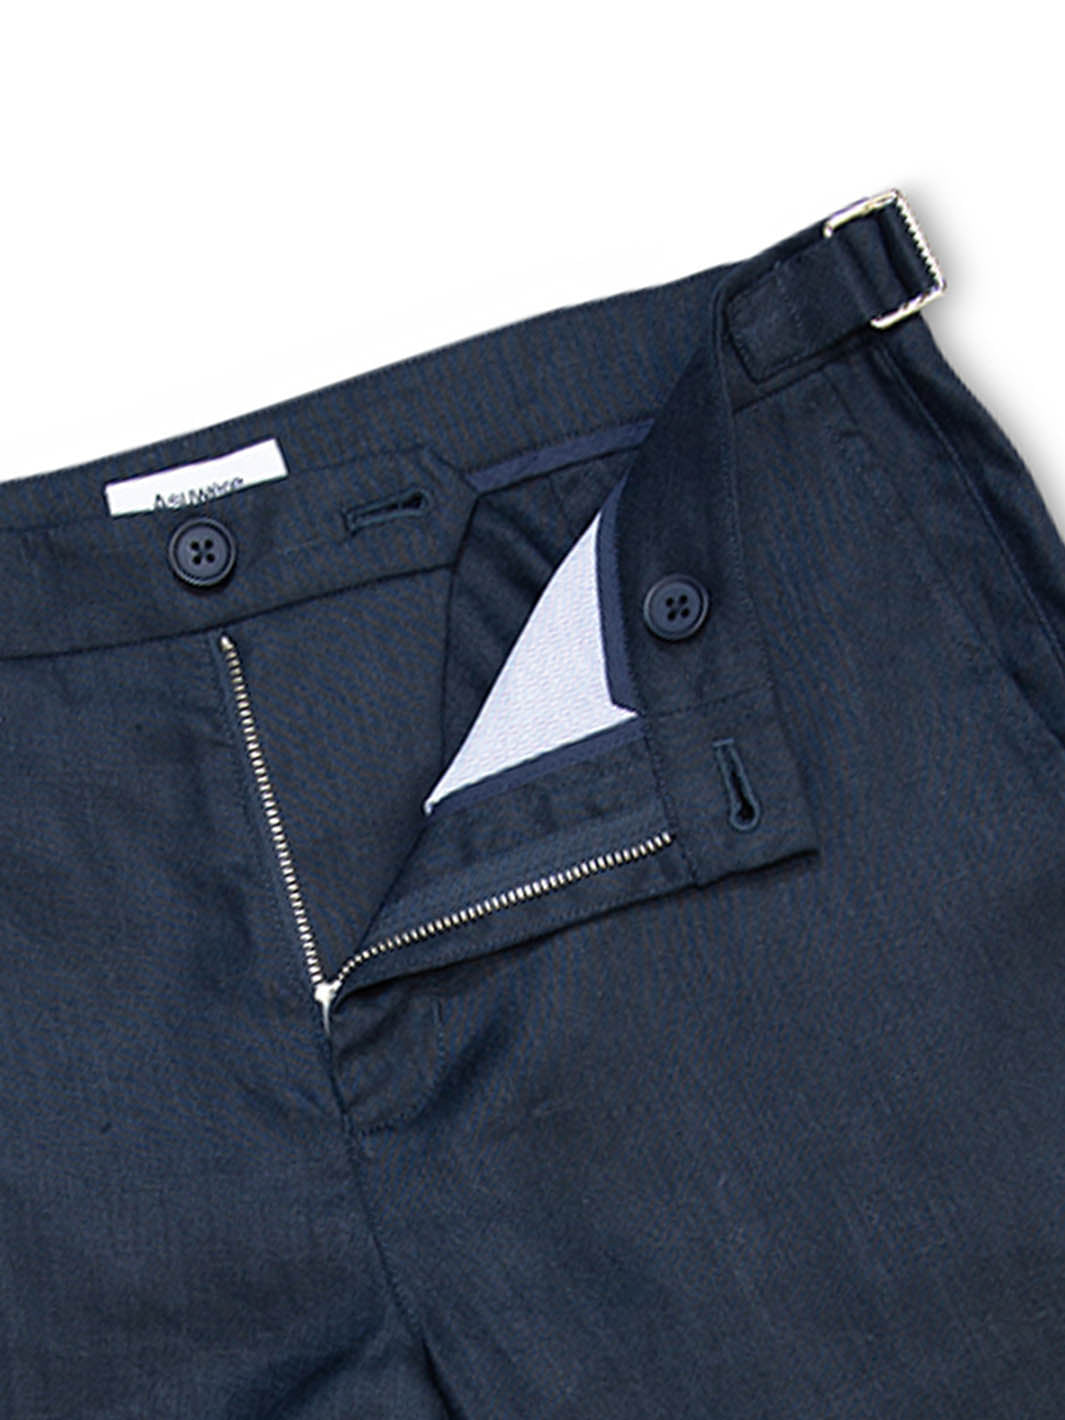 Essential Linen Daily Chino - Navy